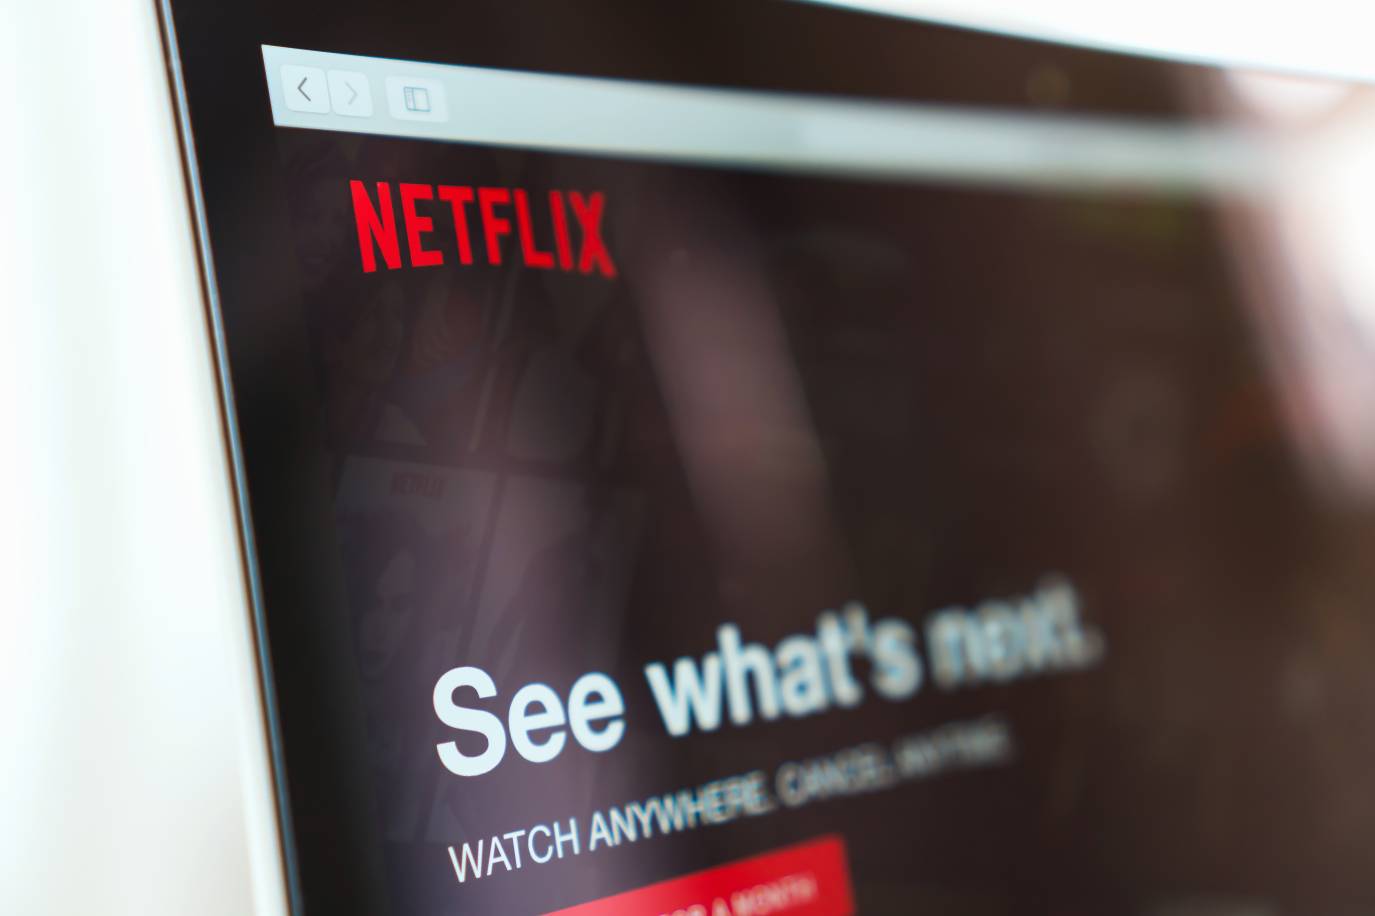 How To Log Out Of Netflix On TV